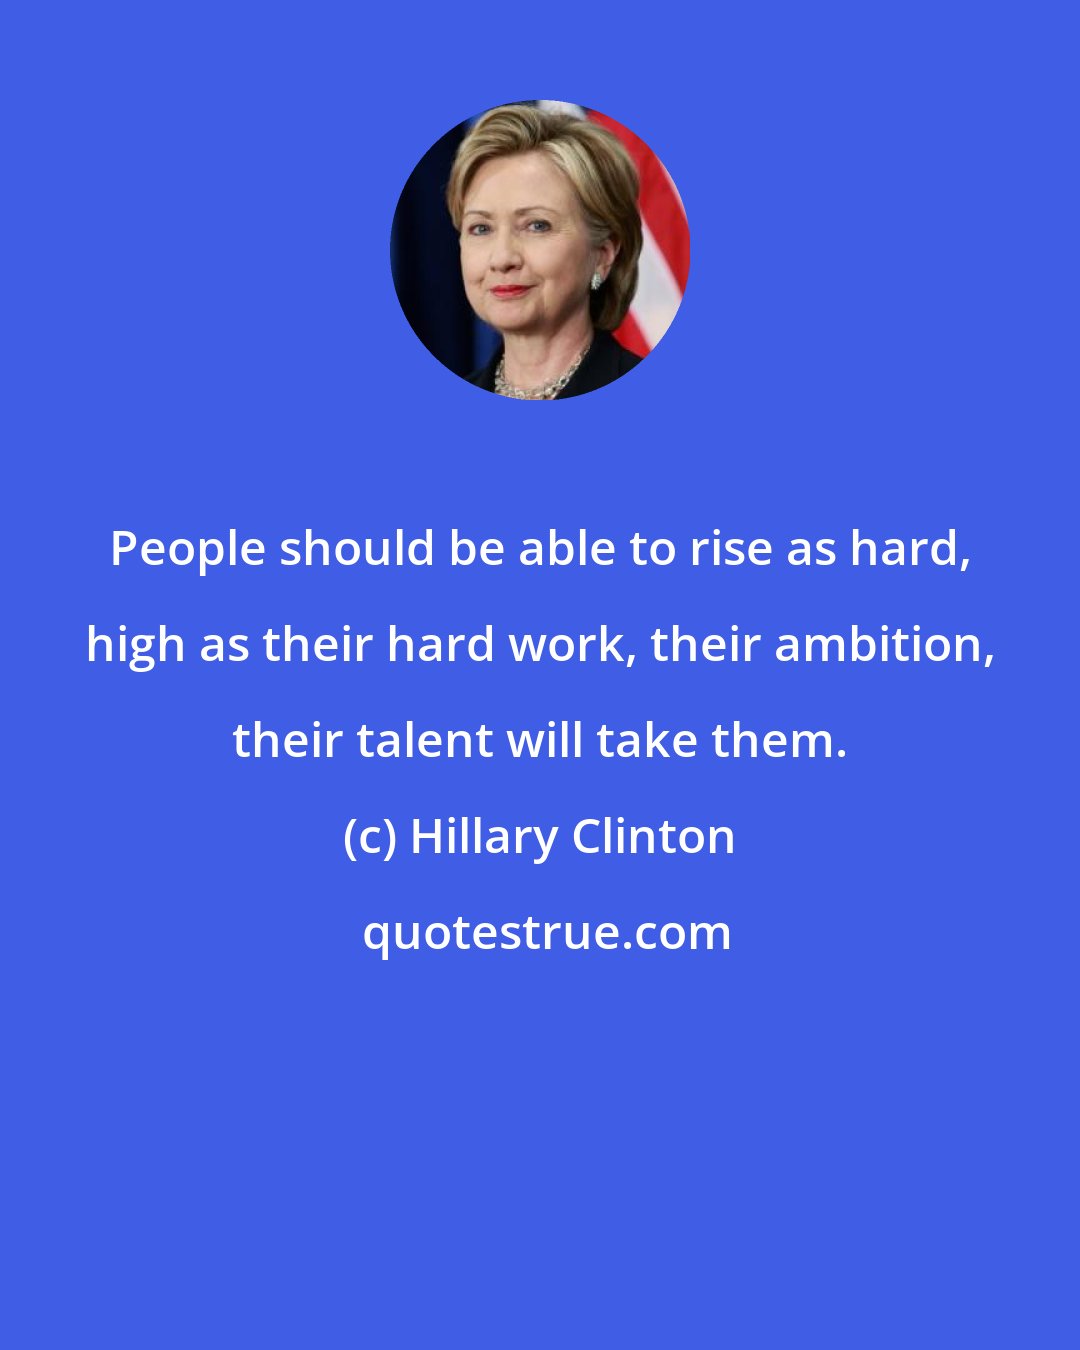 Hillary Clinton: People should be able to rise as hard, high as their hard work, their ambition, their talent will take them.